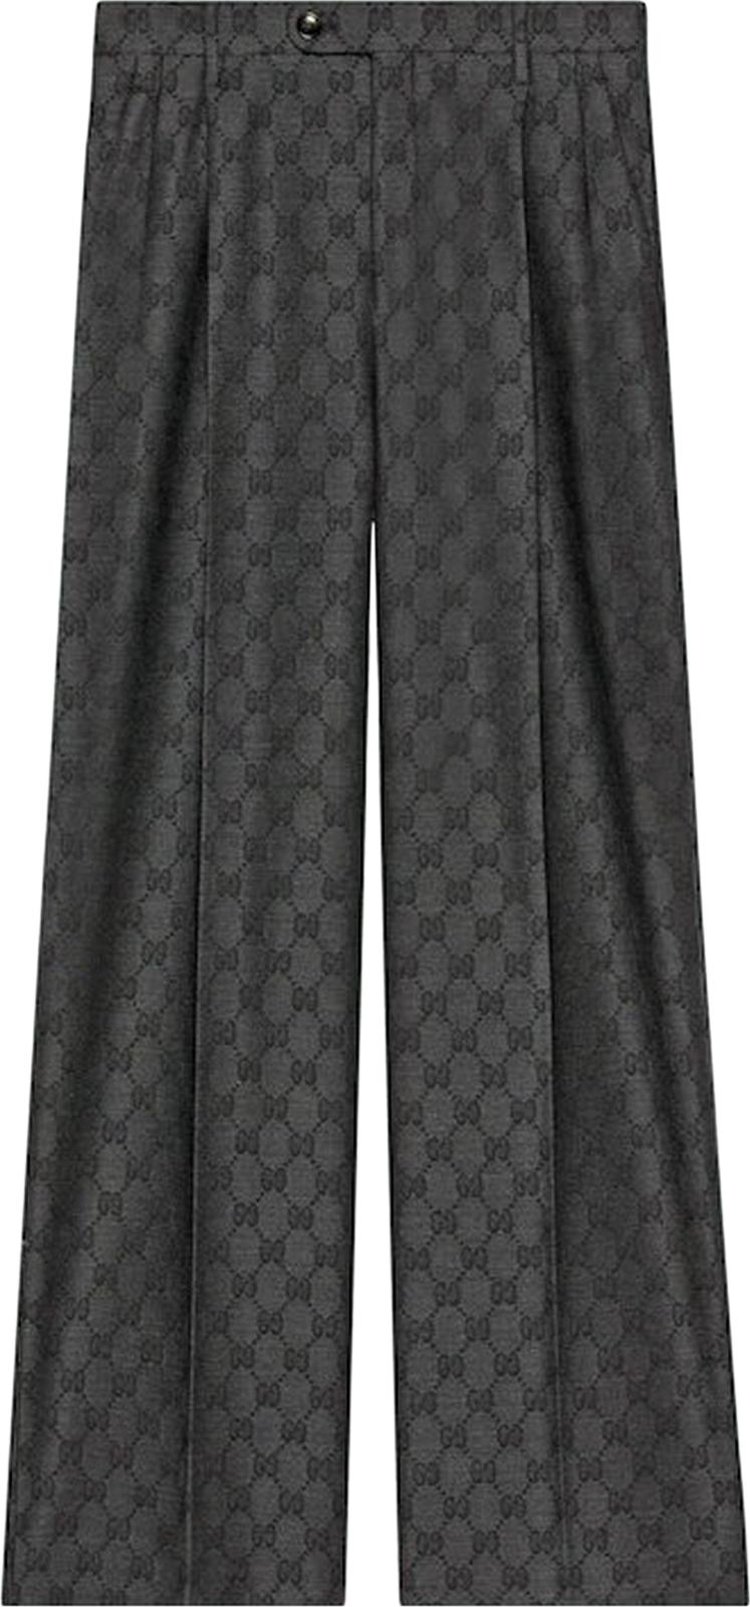 Trousers Gucci GG Trousers 715693 ZAKF8